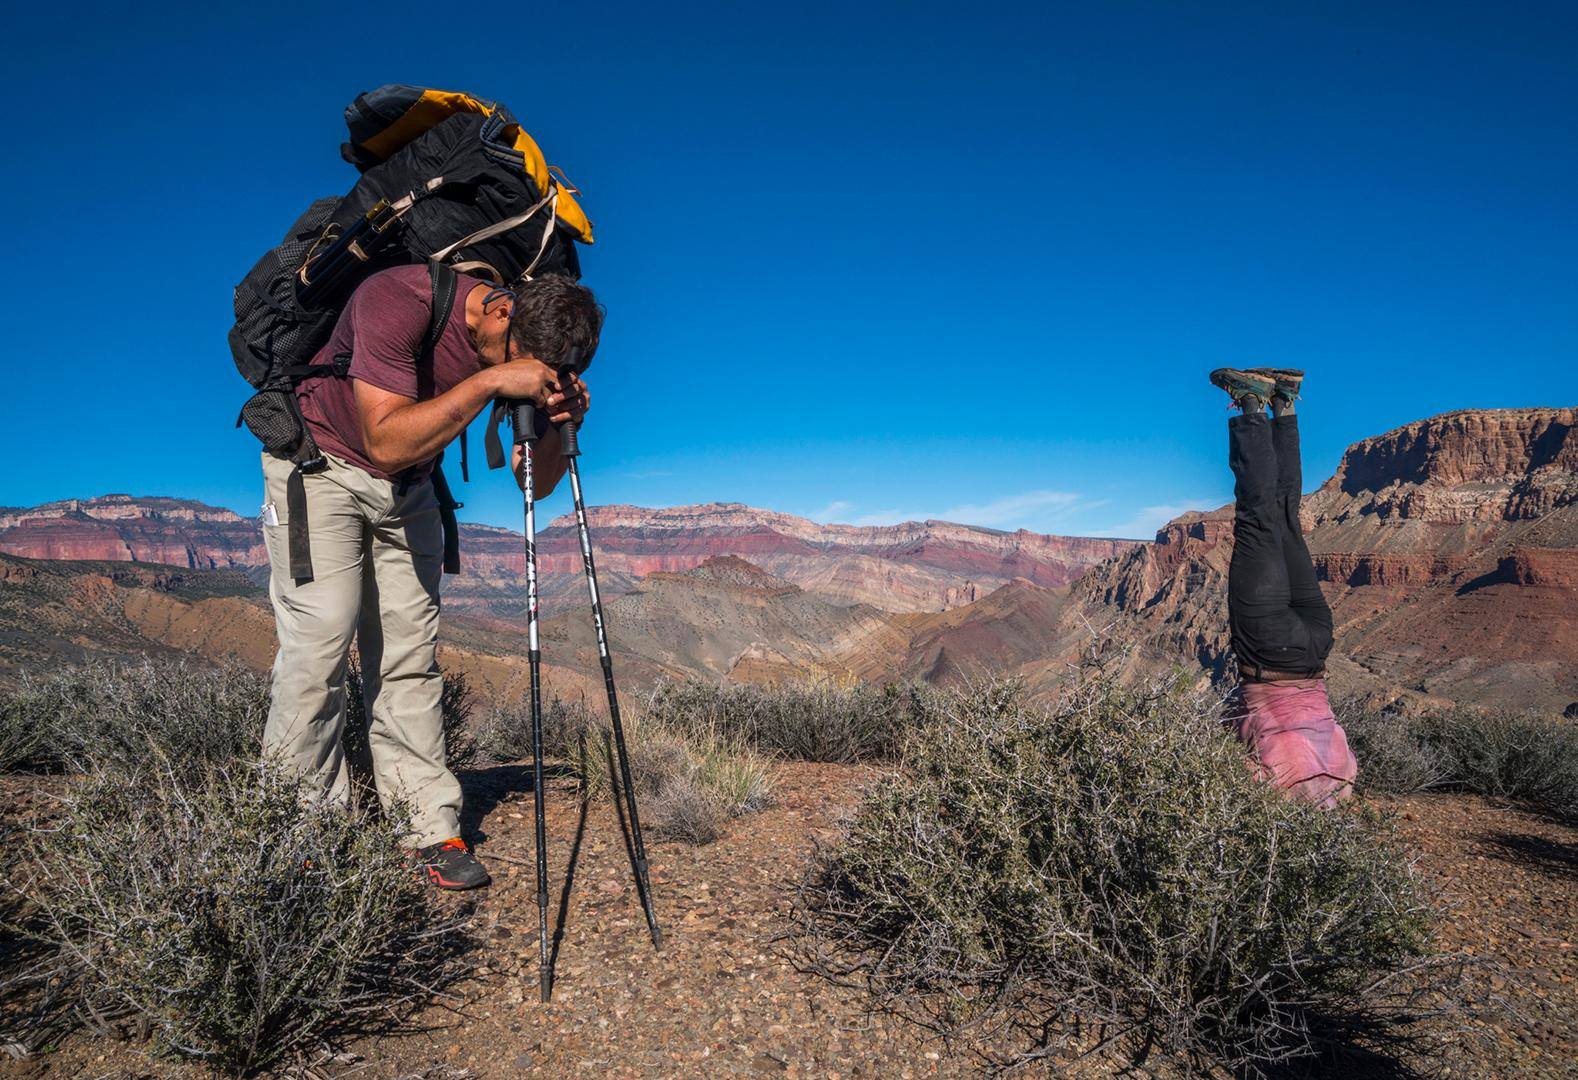 Same experience, different perspectives: Kevin Fedarko rests on his poles, while Kelly McGrath stands on her head, subsequent to a five-hour climb to the rim of the Grand Canyon after hiking its 750-mile length.